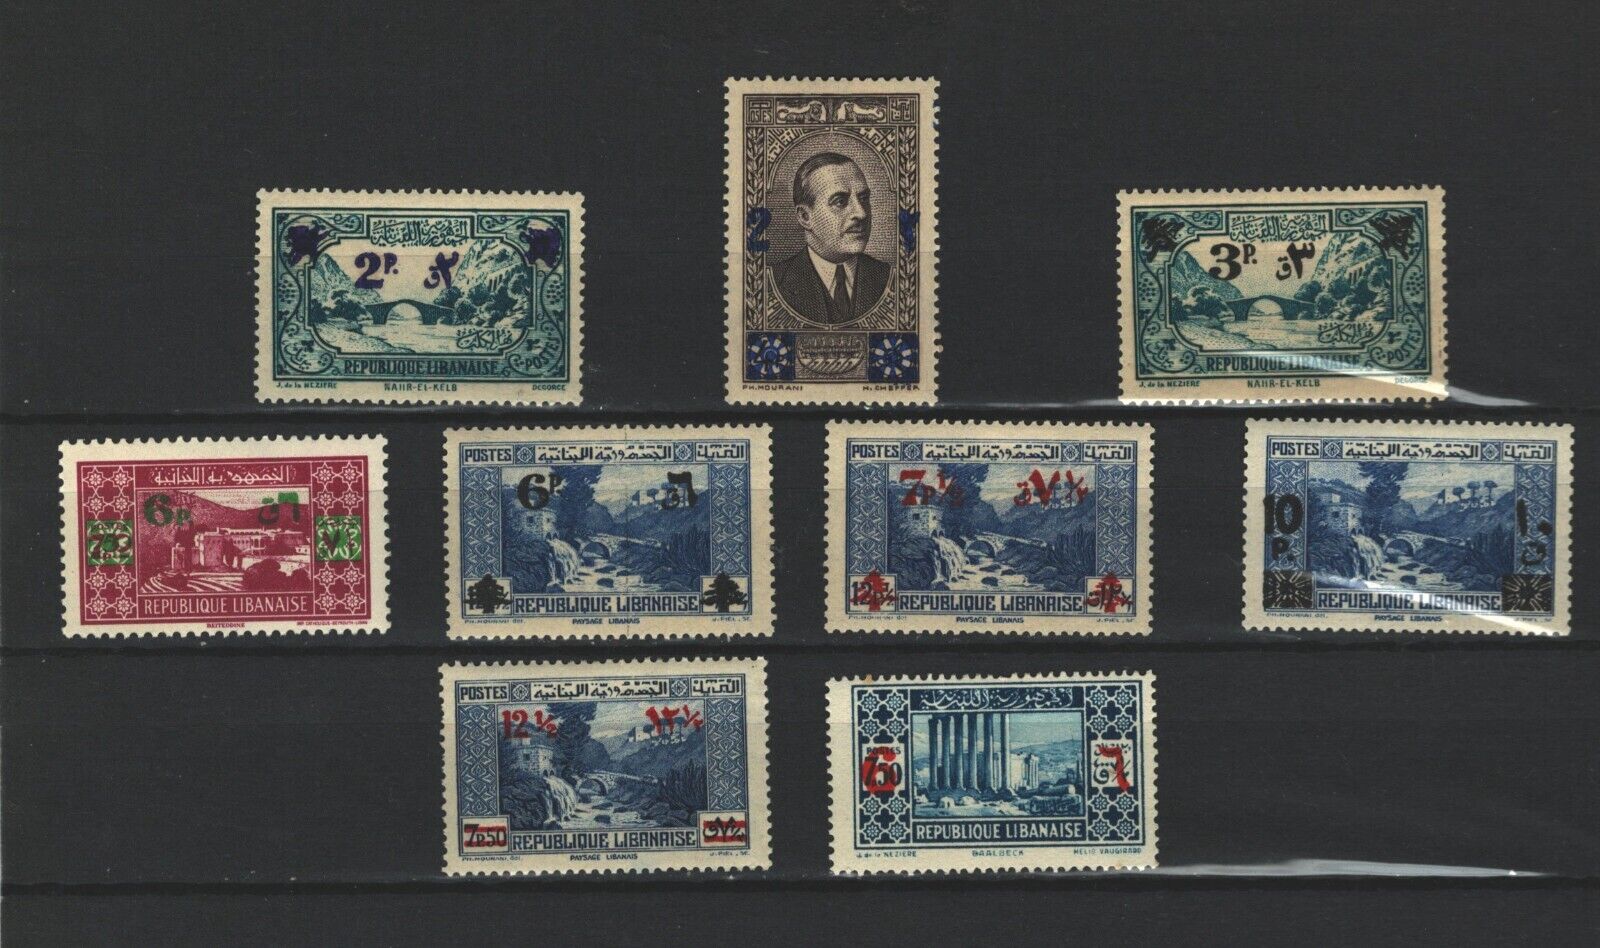 LEBANON LIBAN  FRENCH COLONIES SELECTION  MH  OVERPRMTED STAMP LOT (LEB 446) Без бренда